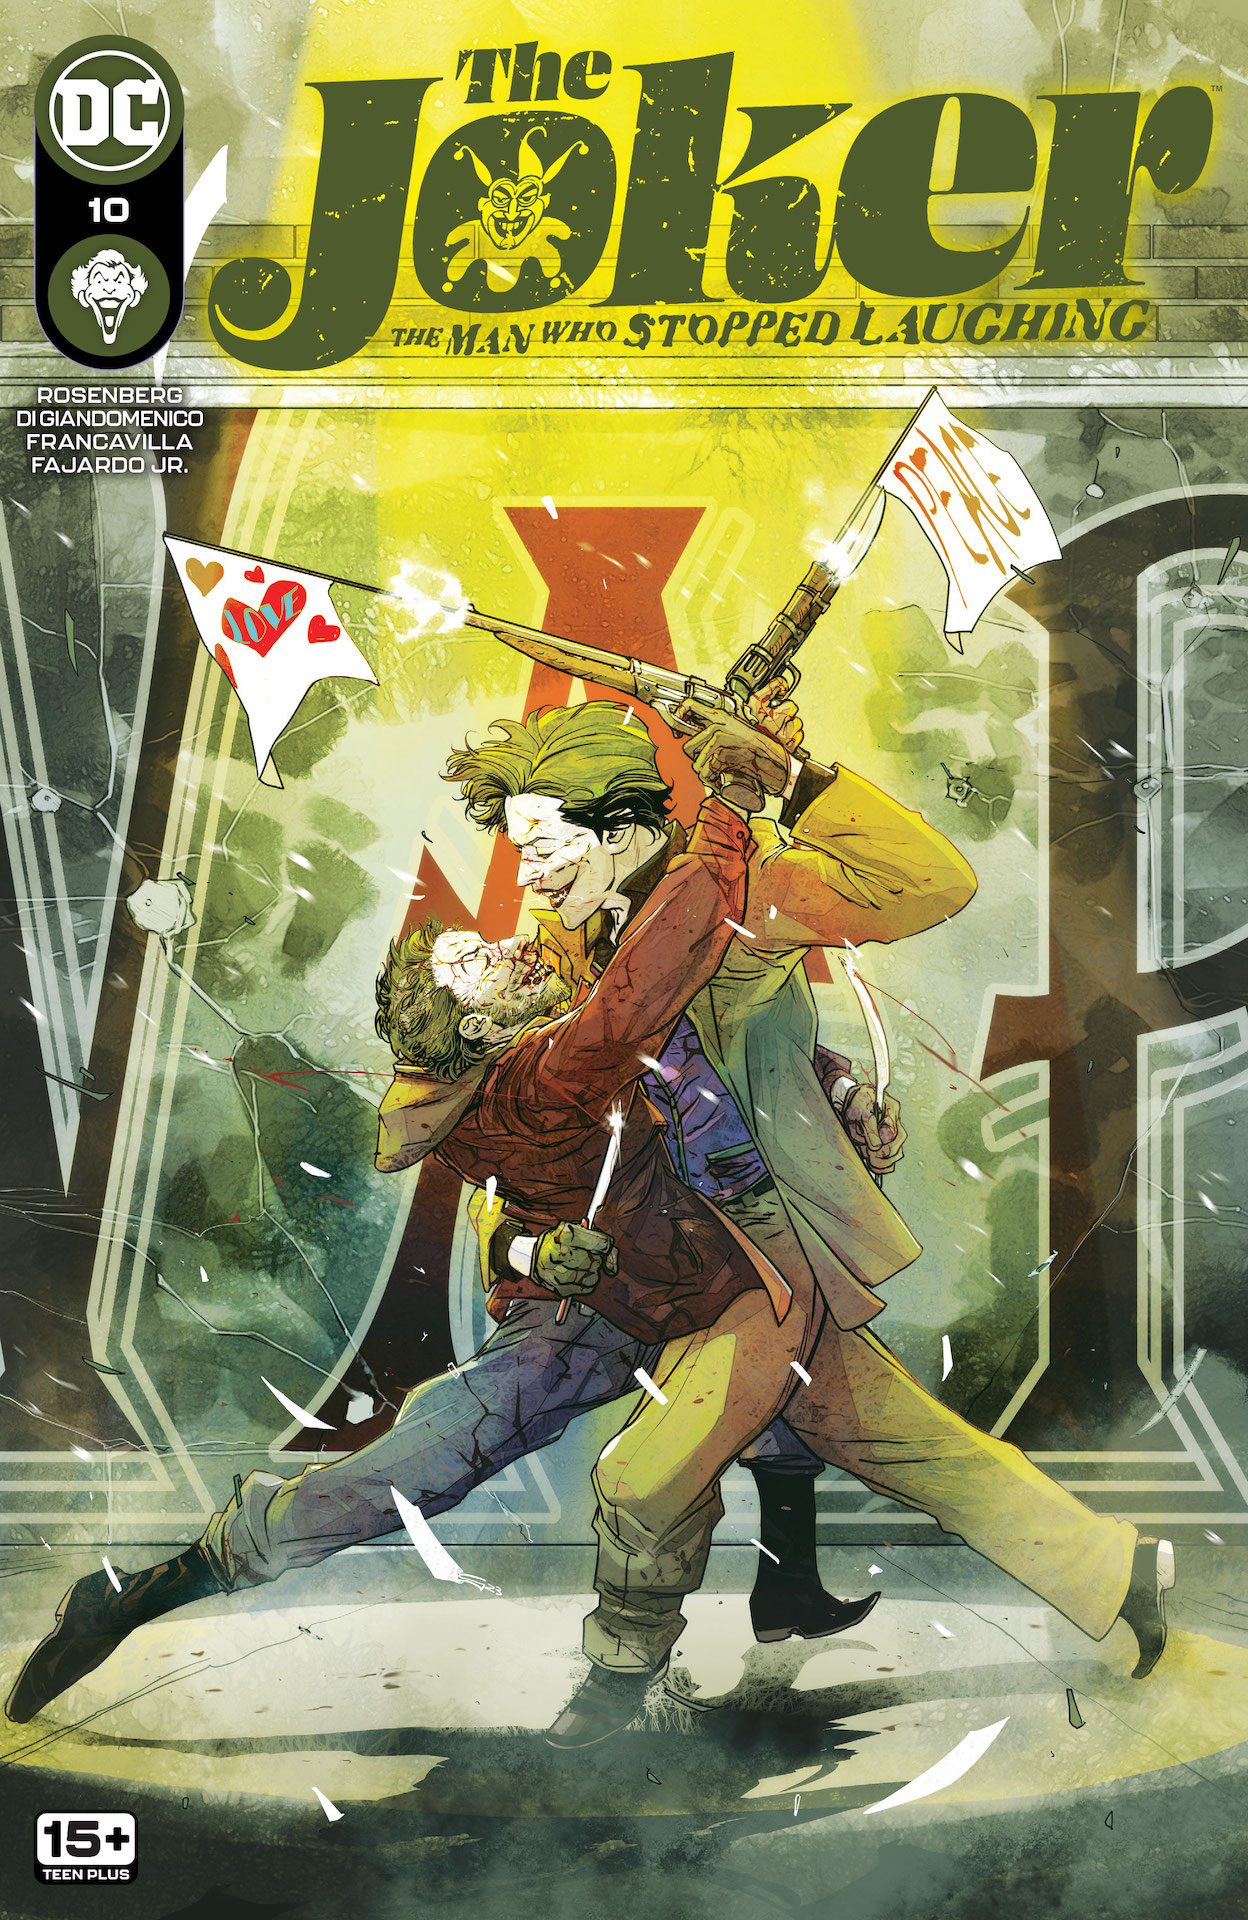 DC Preview: The Joker: The Man Who Stopped Laughing #10